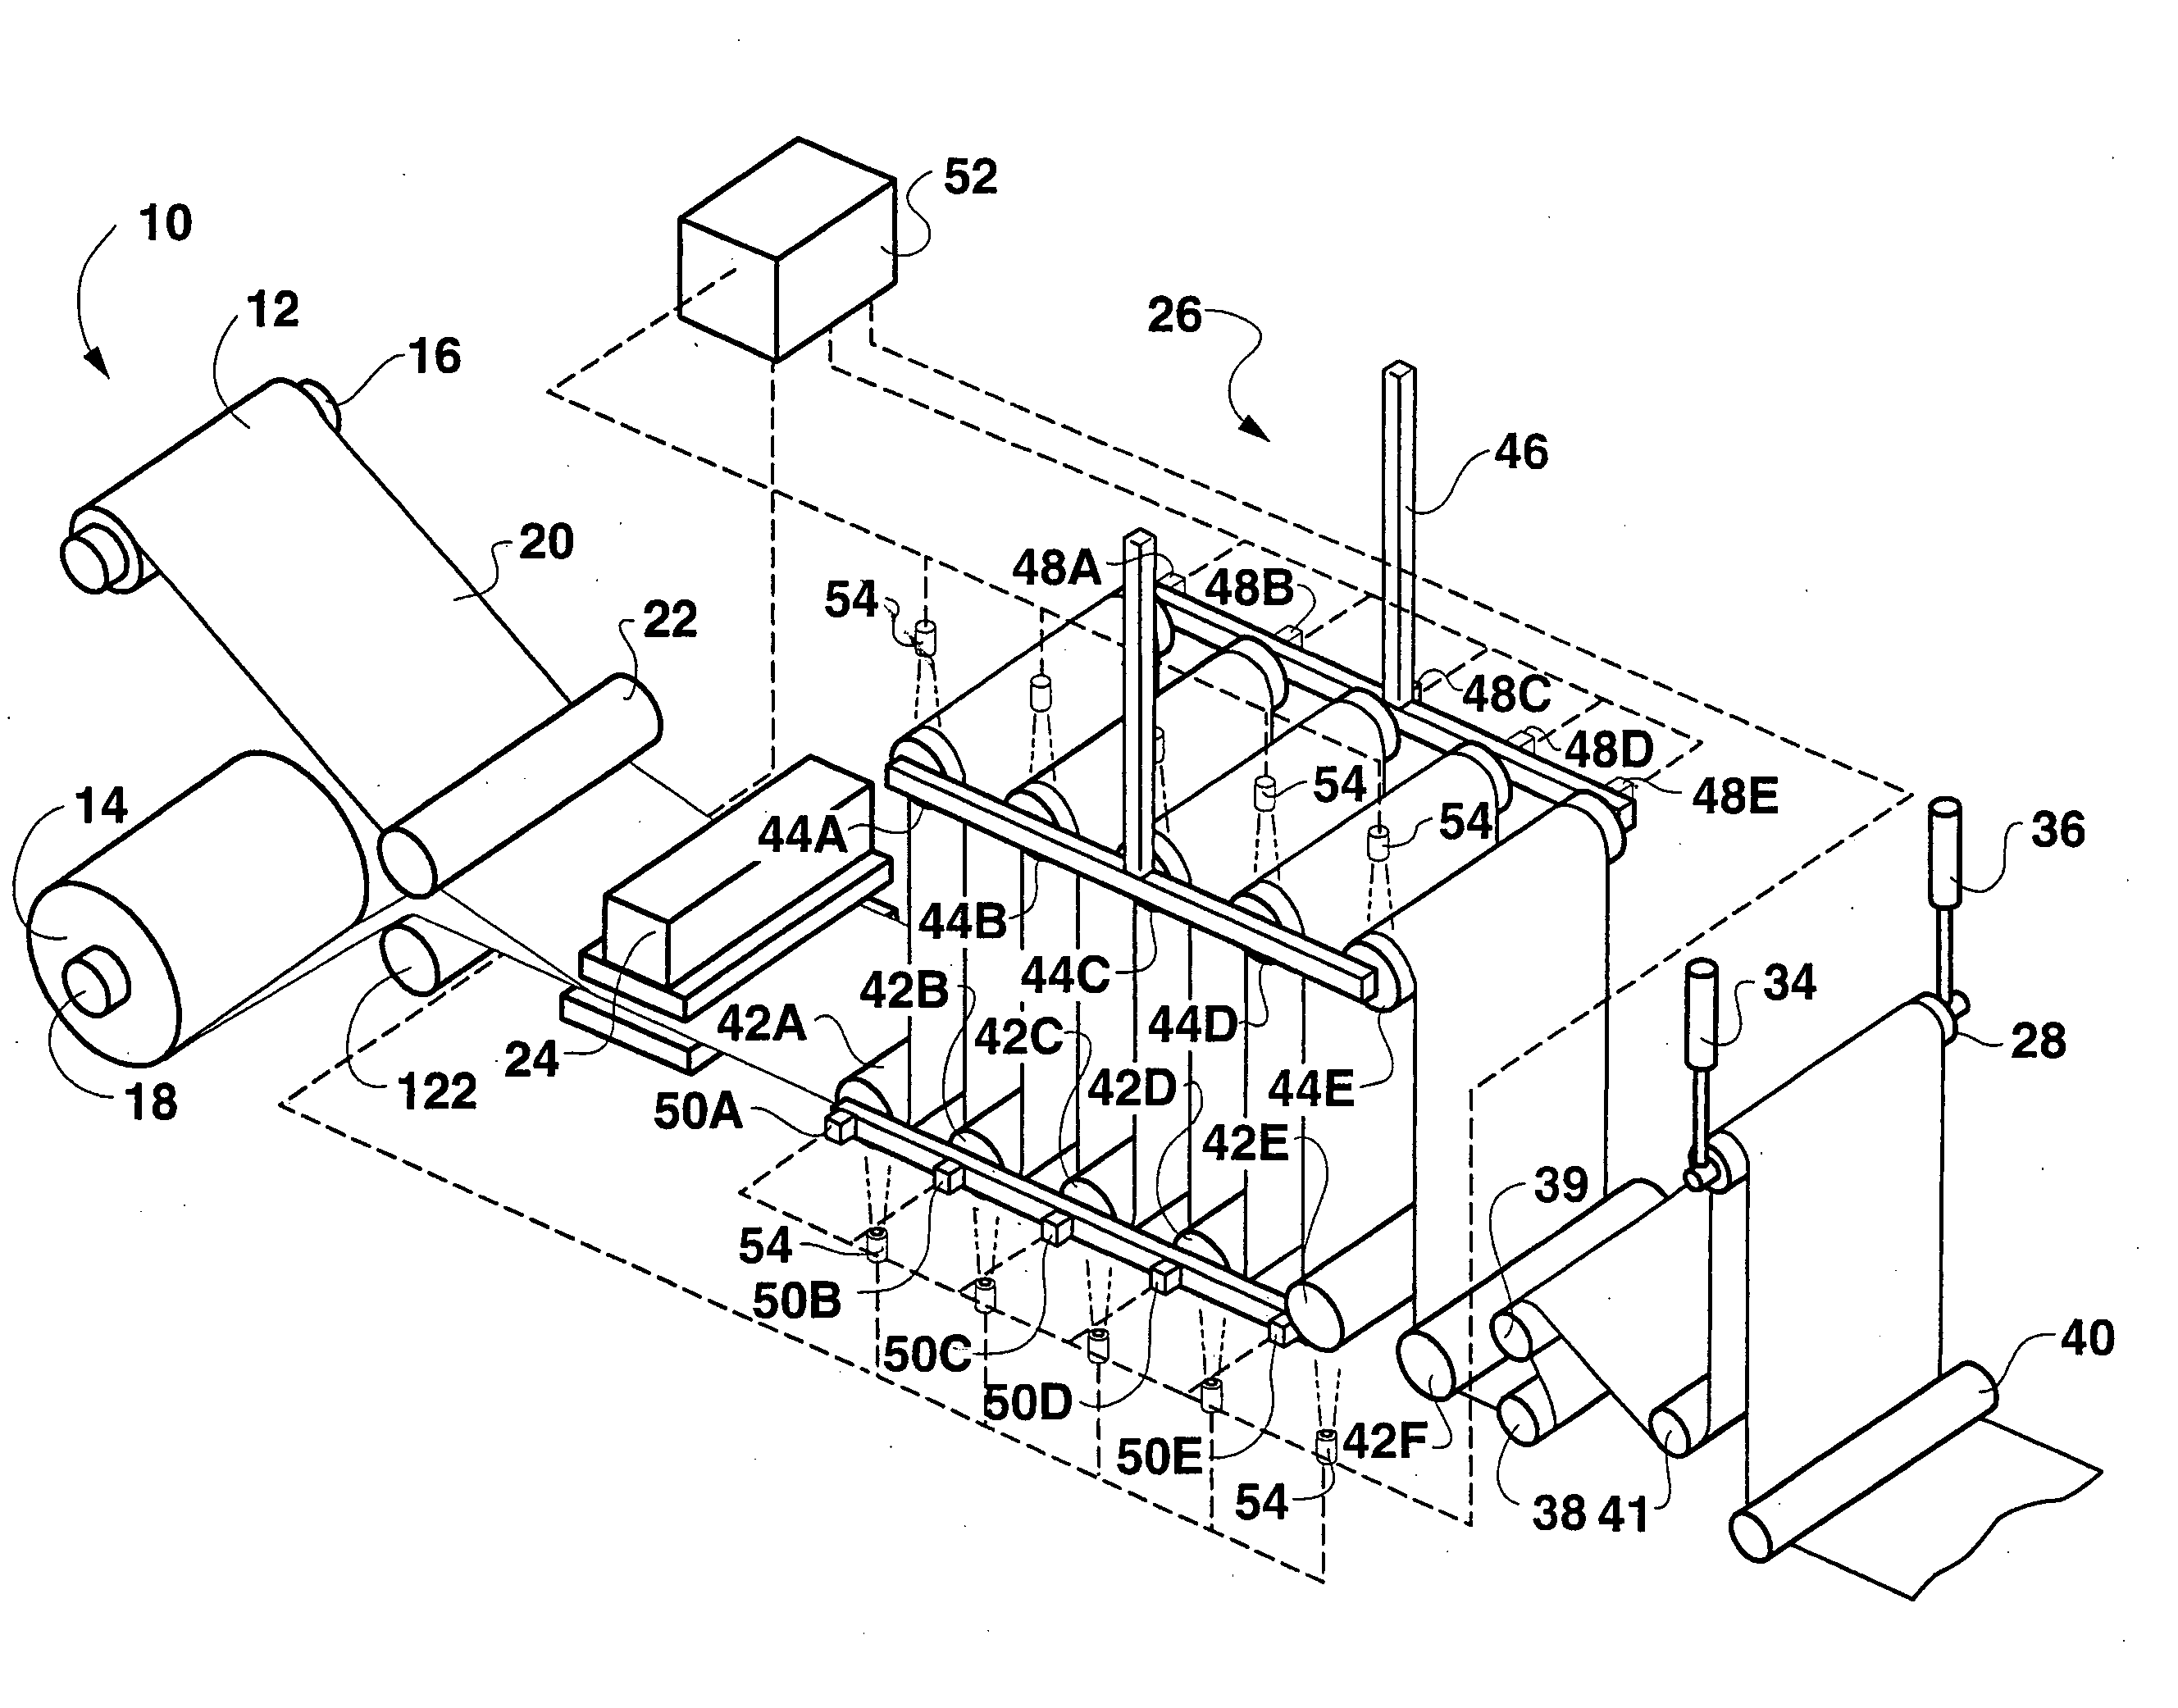 System and process for controlling the deceleration and acceleration rates of a sheet material in forming absorbent articles